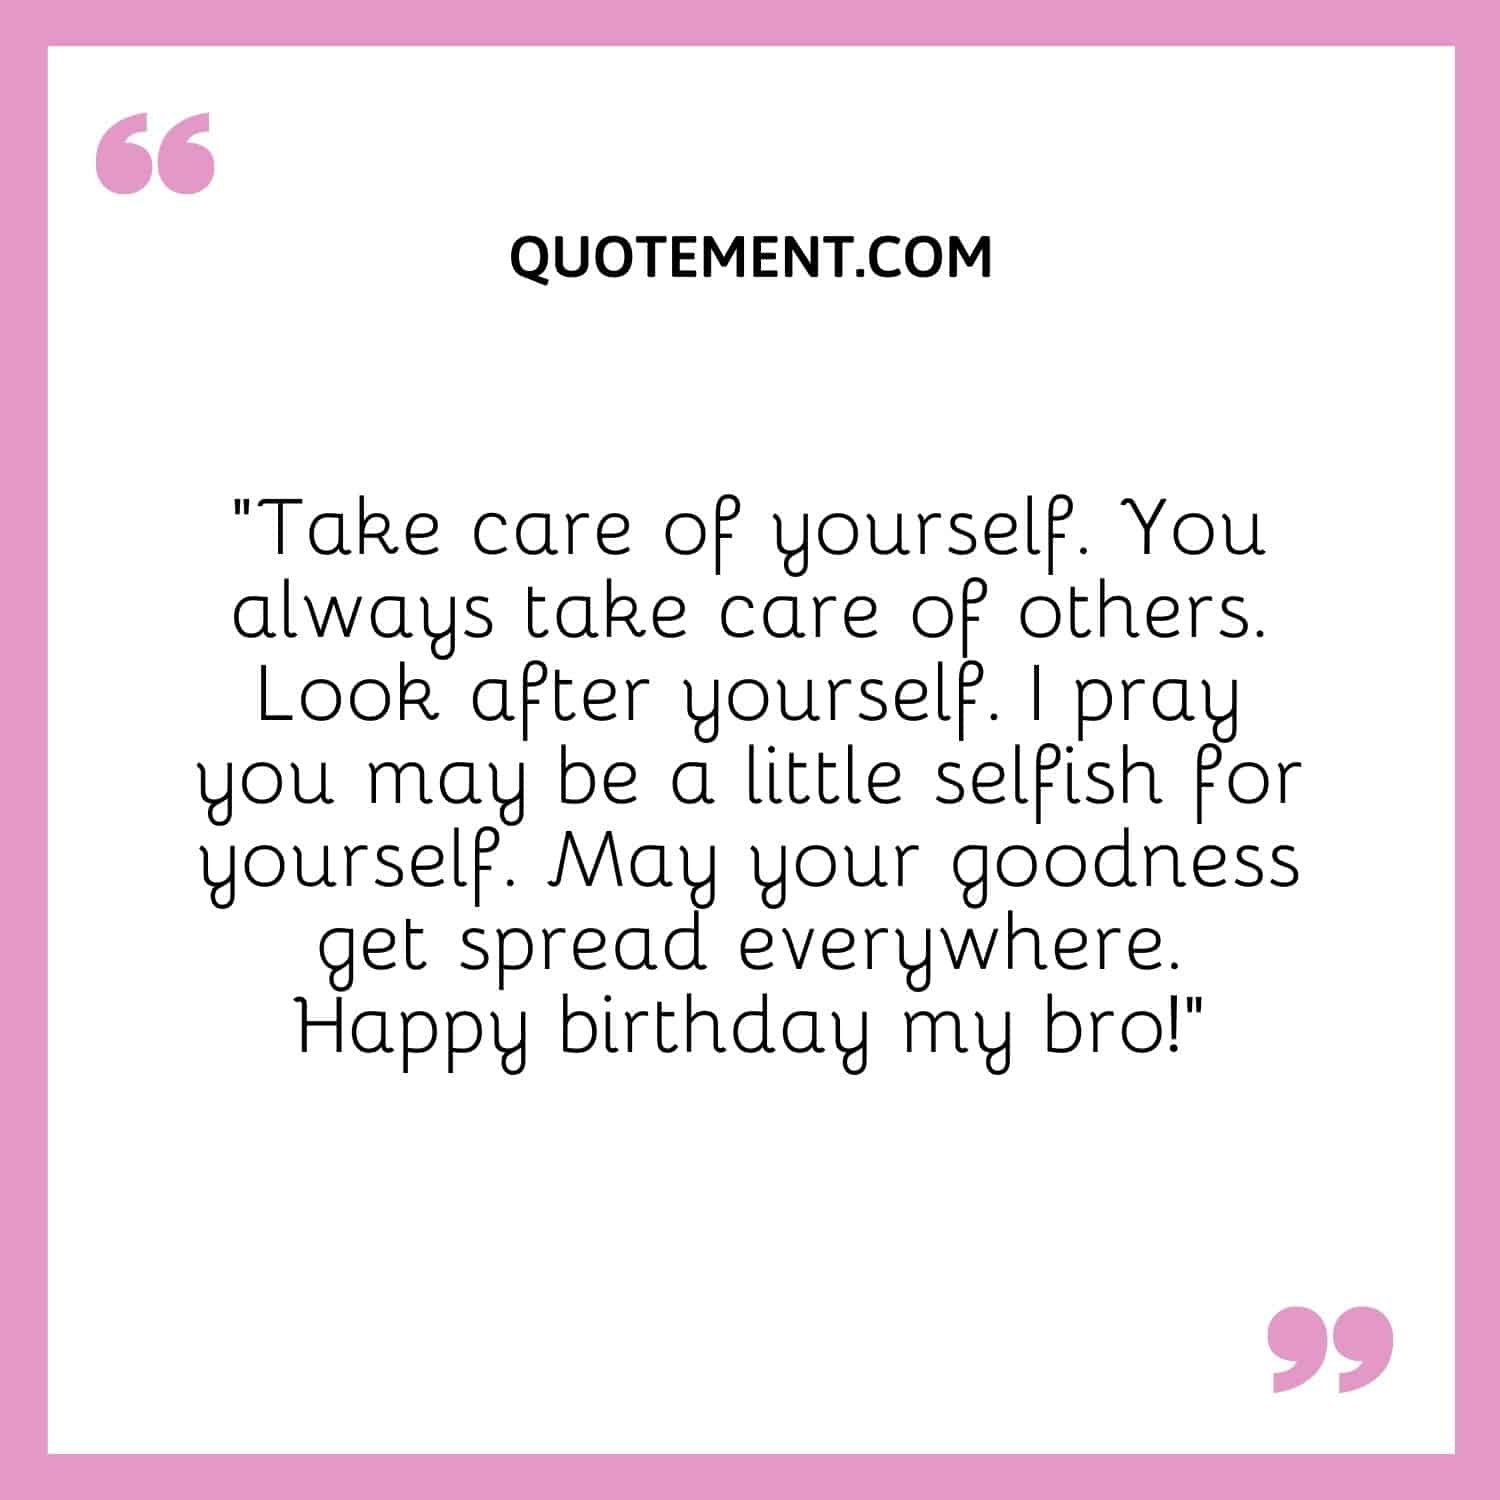 Take care of yourself. You always take care of others.